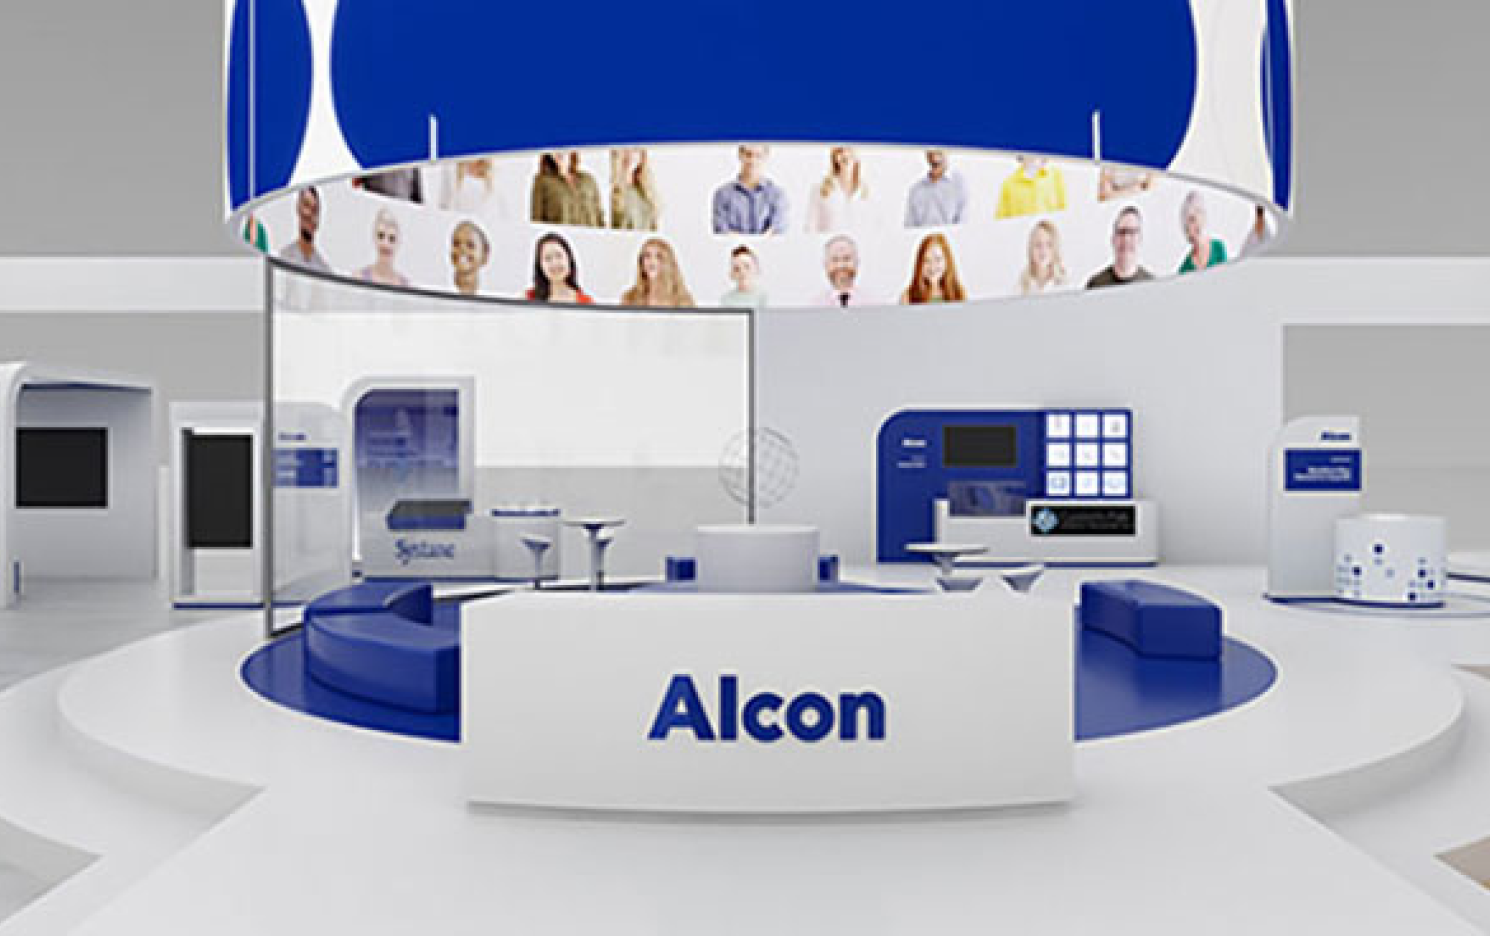 Room with Alcon sign